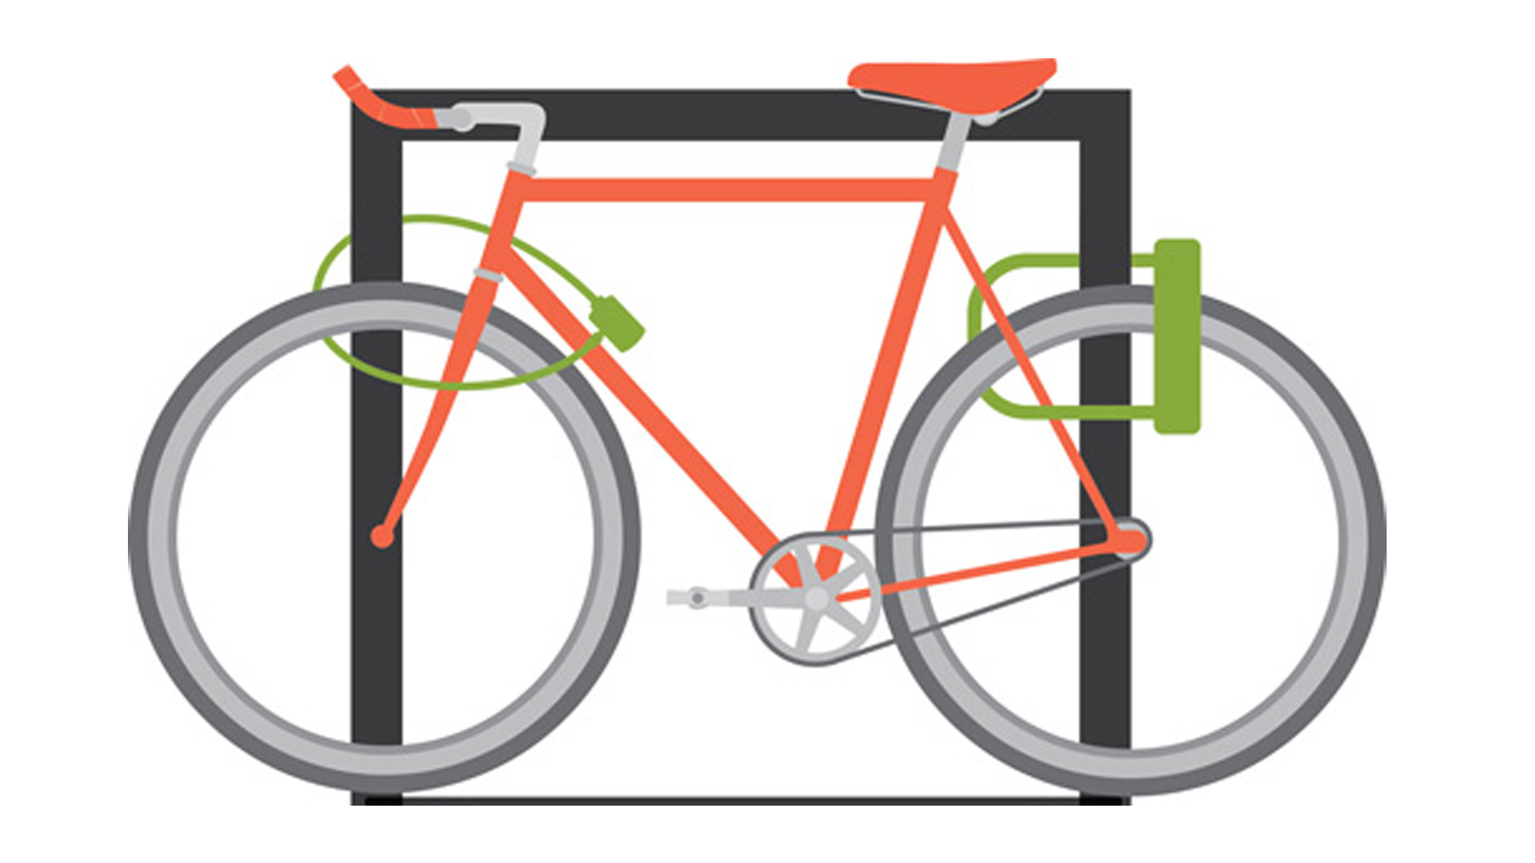 Diagram of bike showing a chain lock around the front wheel and handle bars and a D-lock around the back wheel and seat. The lock secure the bike to a bike park.